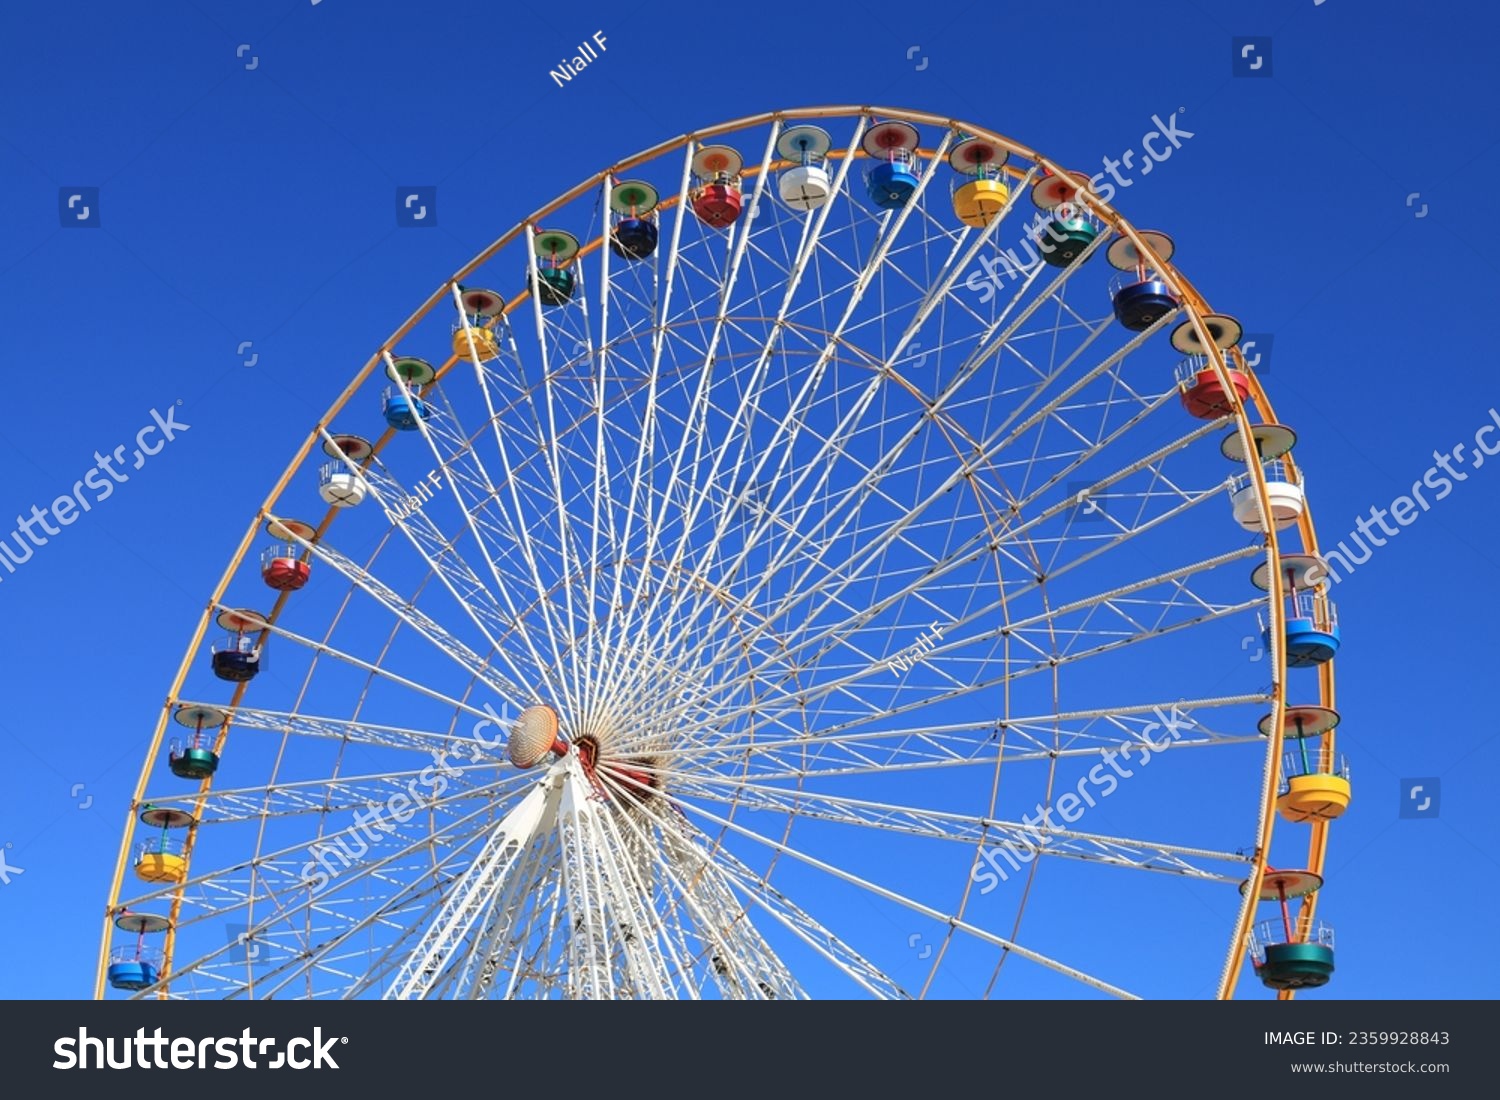 Ferris wheel featuring colourful seating pods against backdrop of blue sky #2359928843